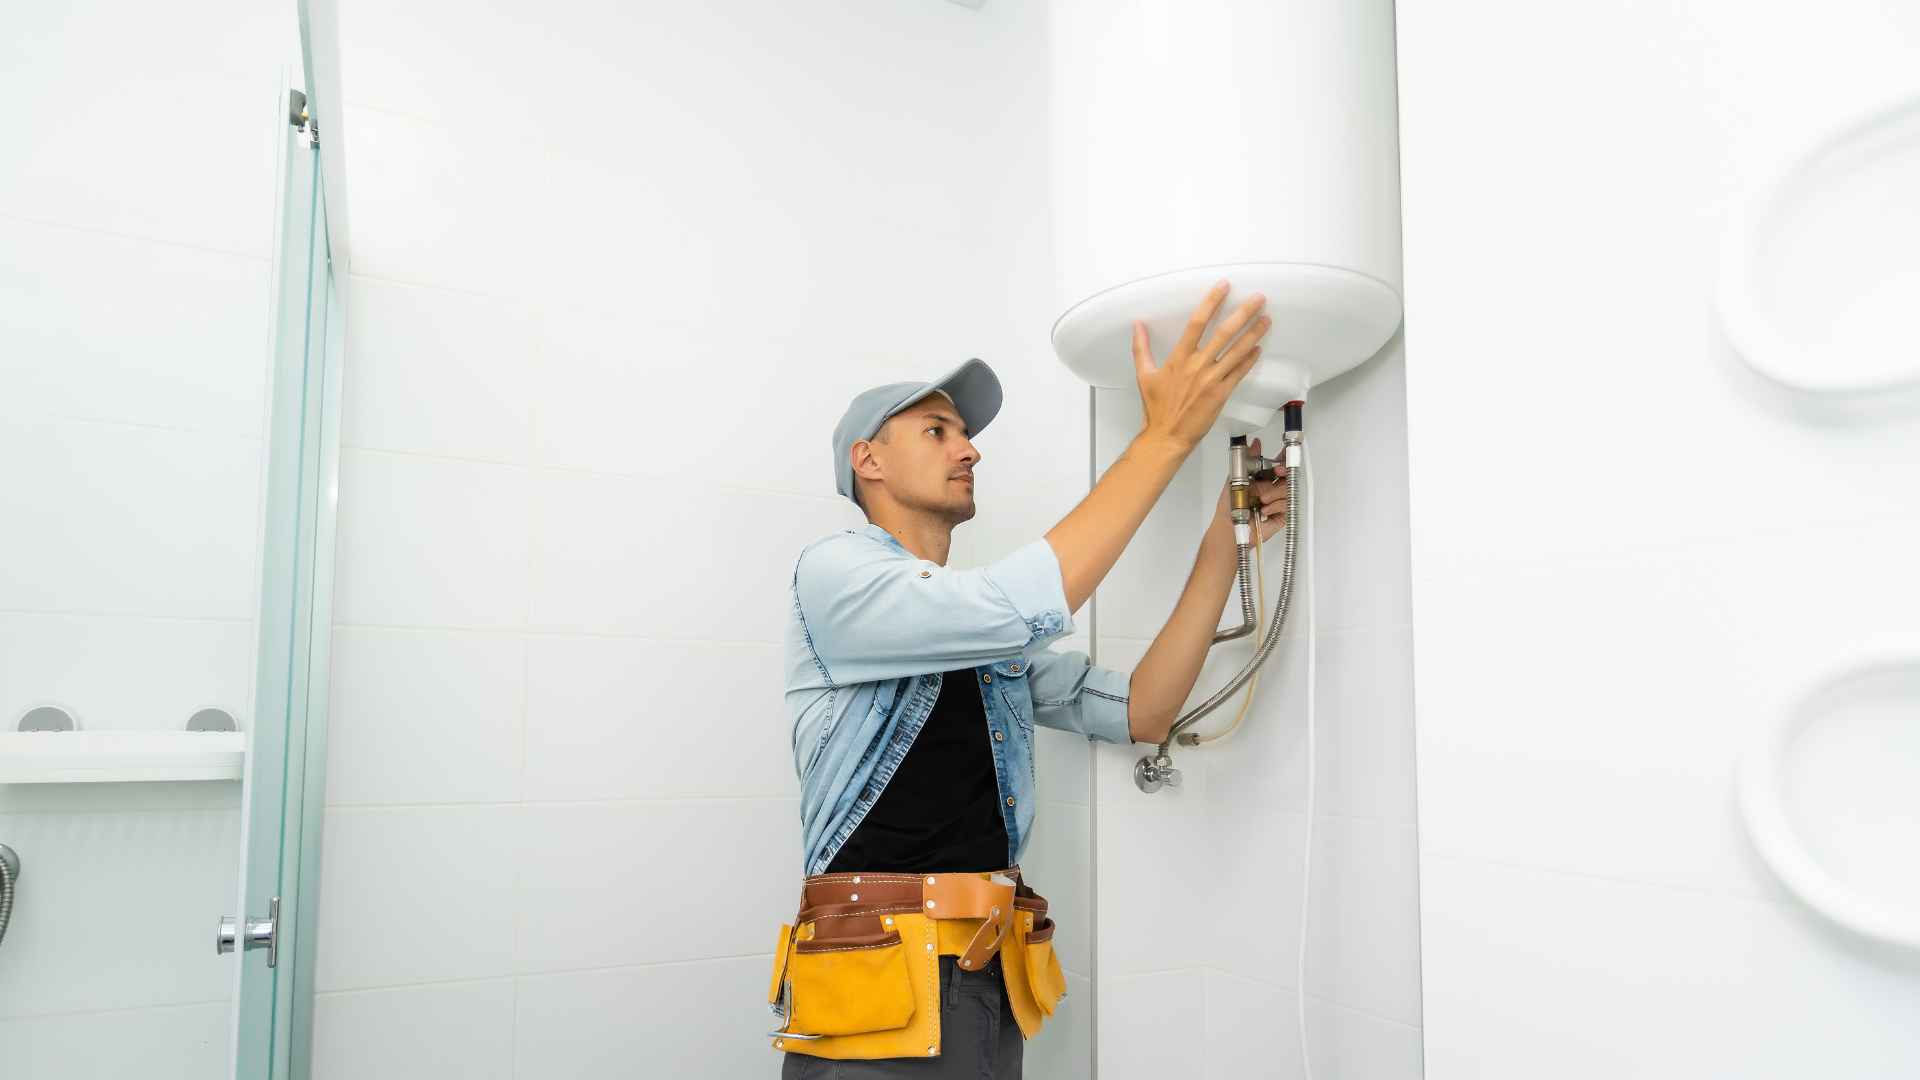 A plumber in a cap and tool belt installs a water heater in a white bathroom.